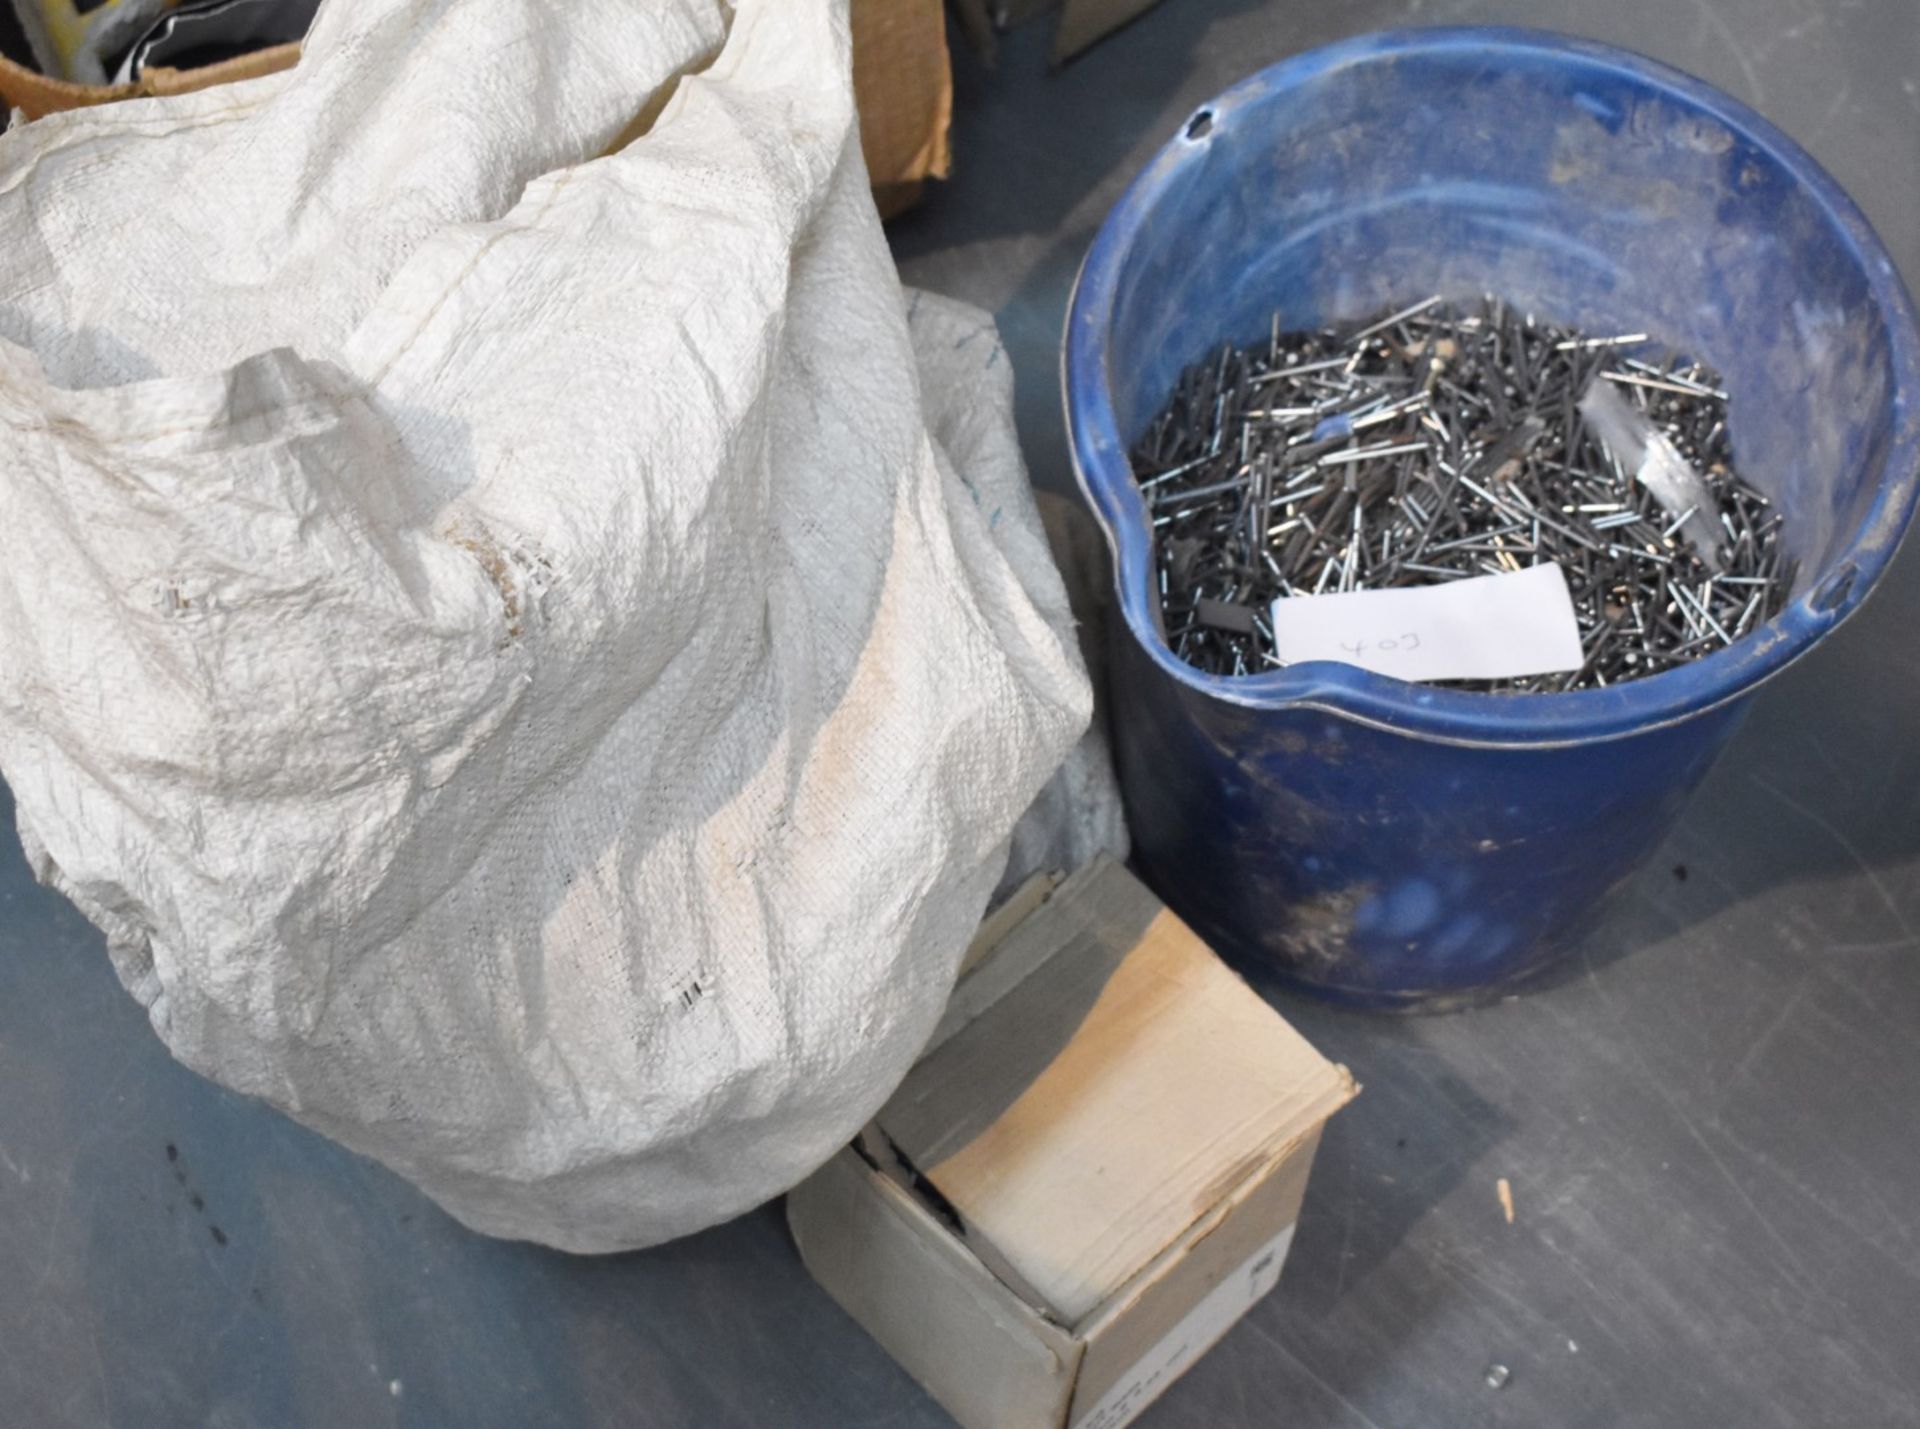 1 x Large Collection of Nails - Includes Large Sack, Box and Bucket Filled With Various Sized